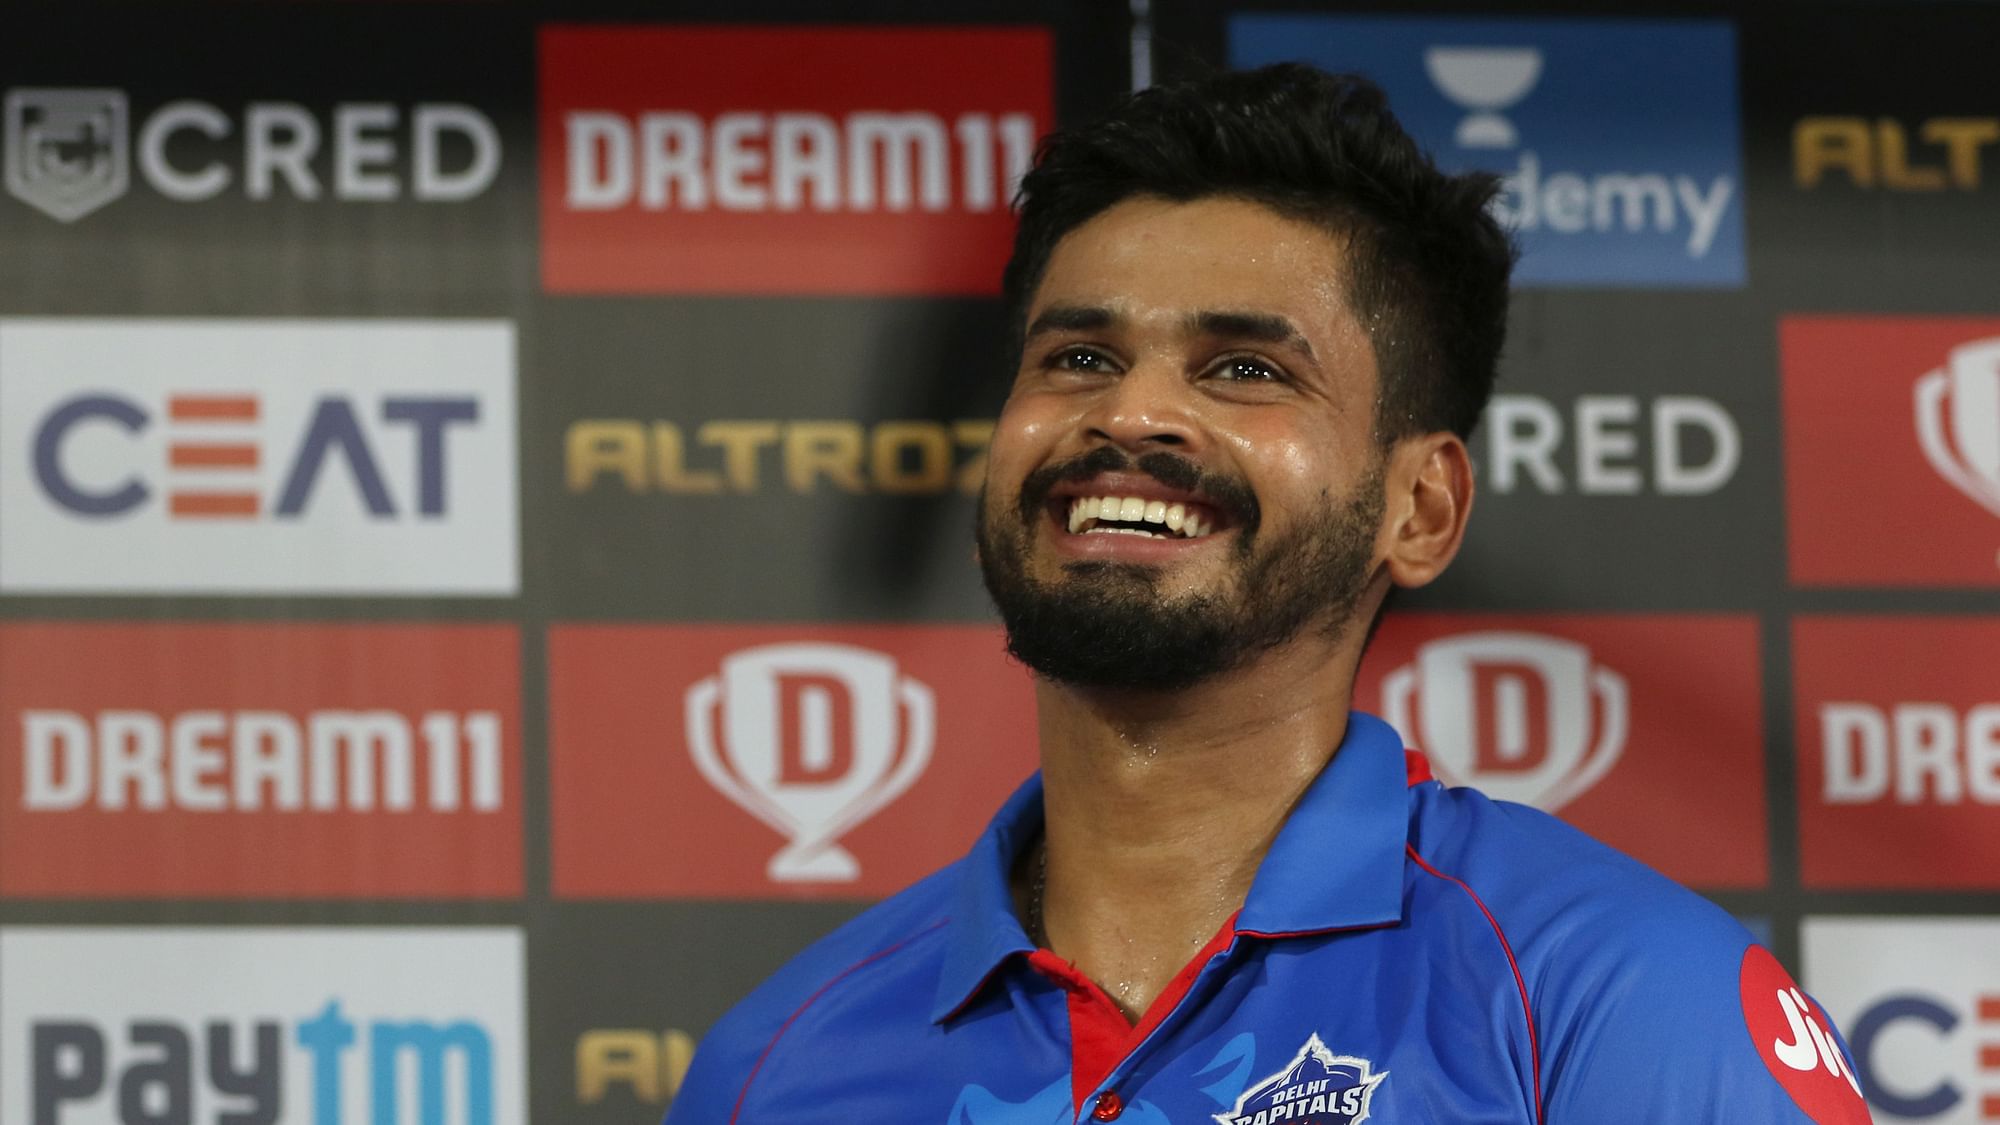 Delhi Capitals (DC) captain Shreyas Iyer called on his team mates to build on the good start to the season. 